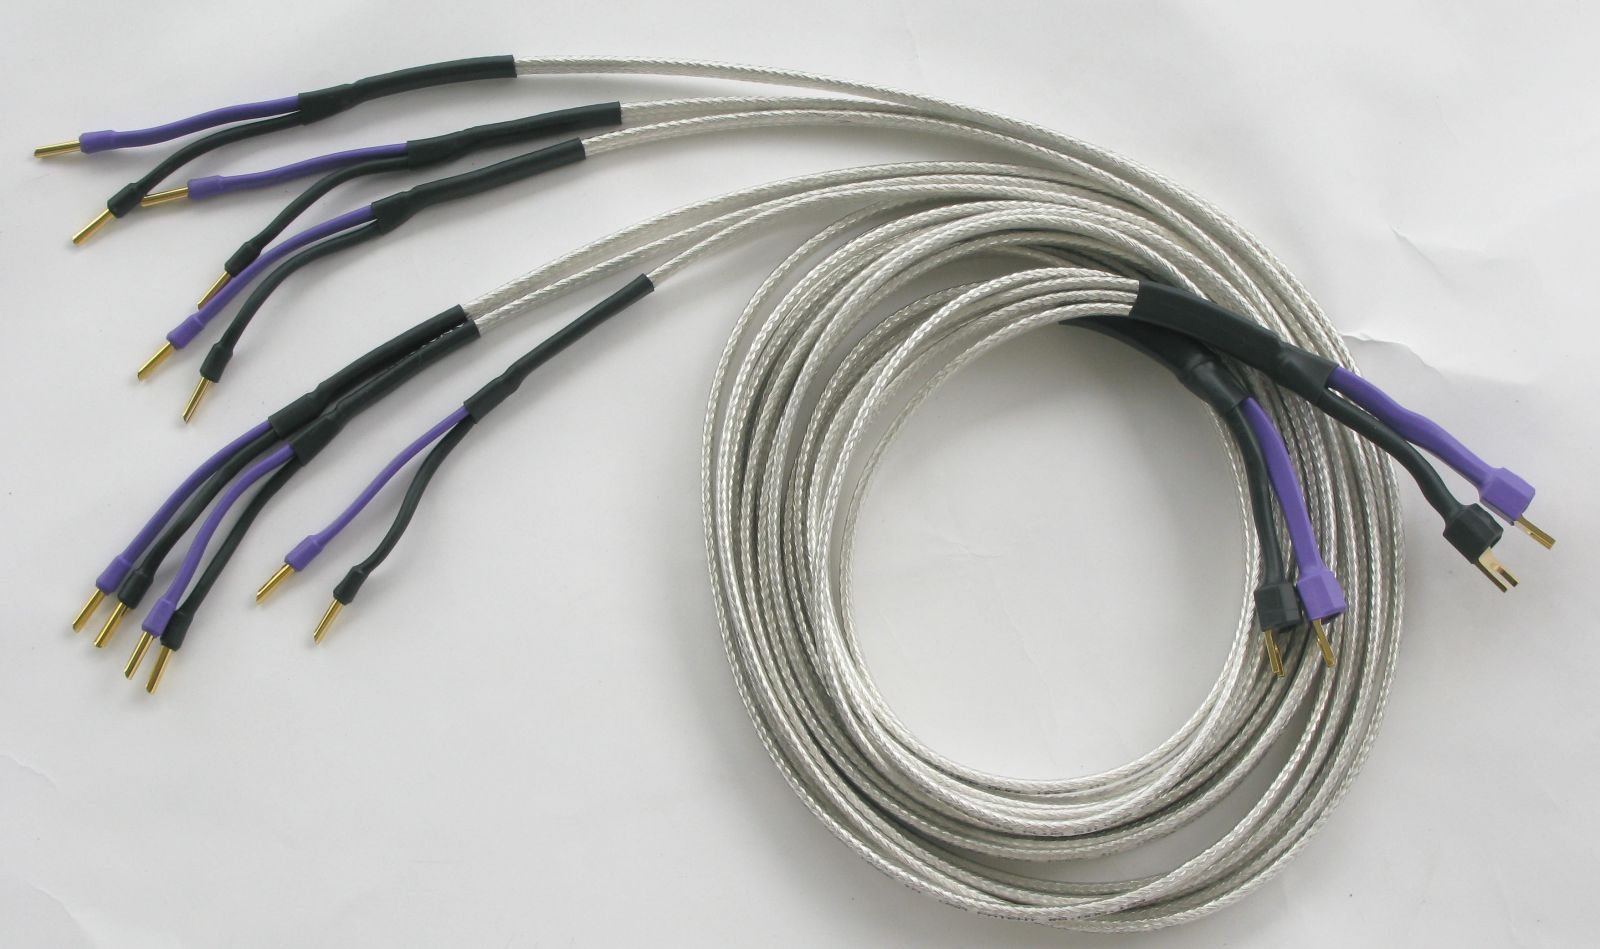 day loa Analysis Custom Cables For Tri-Wire Speakers